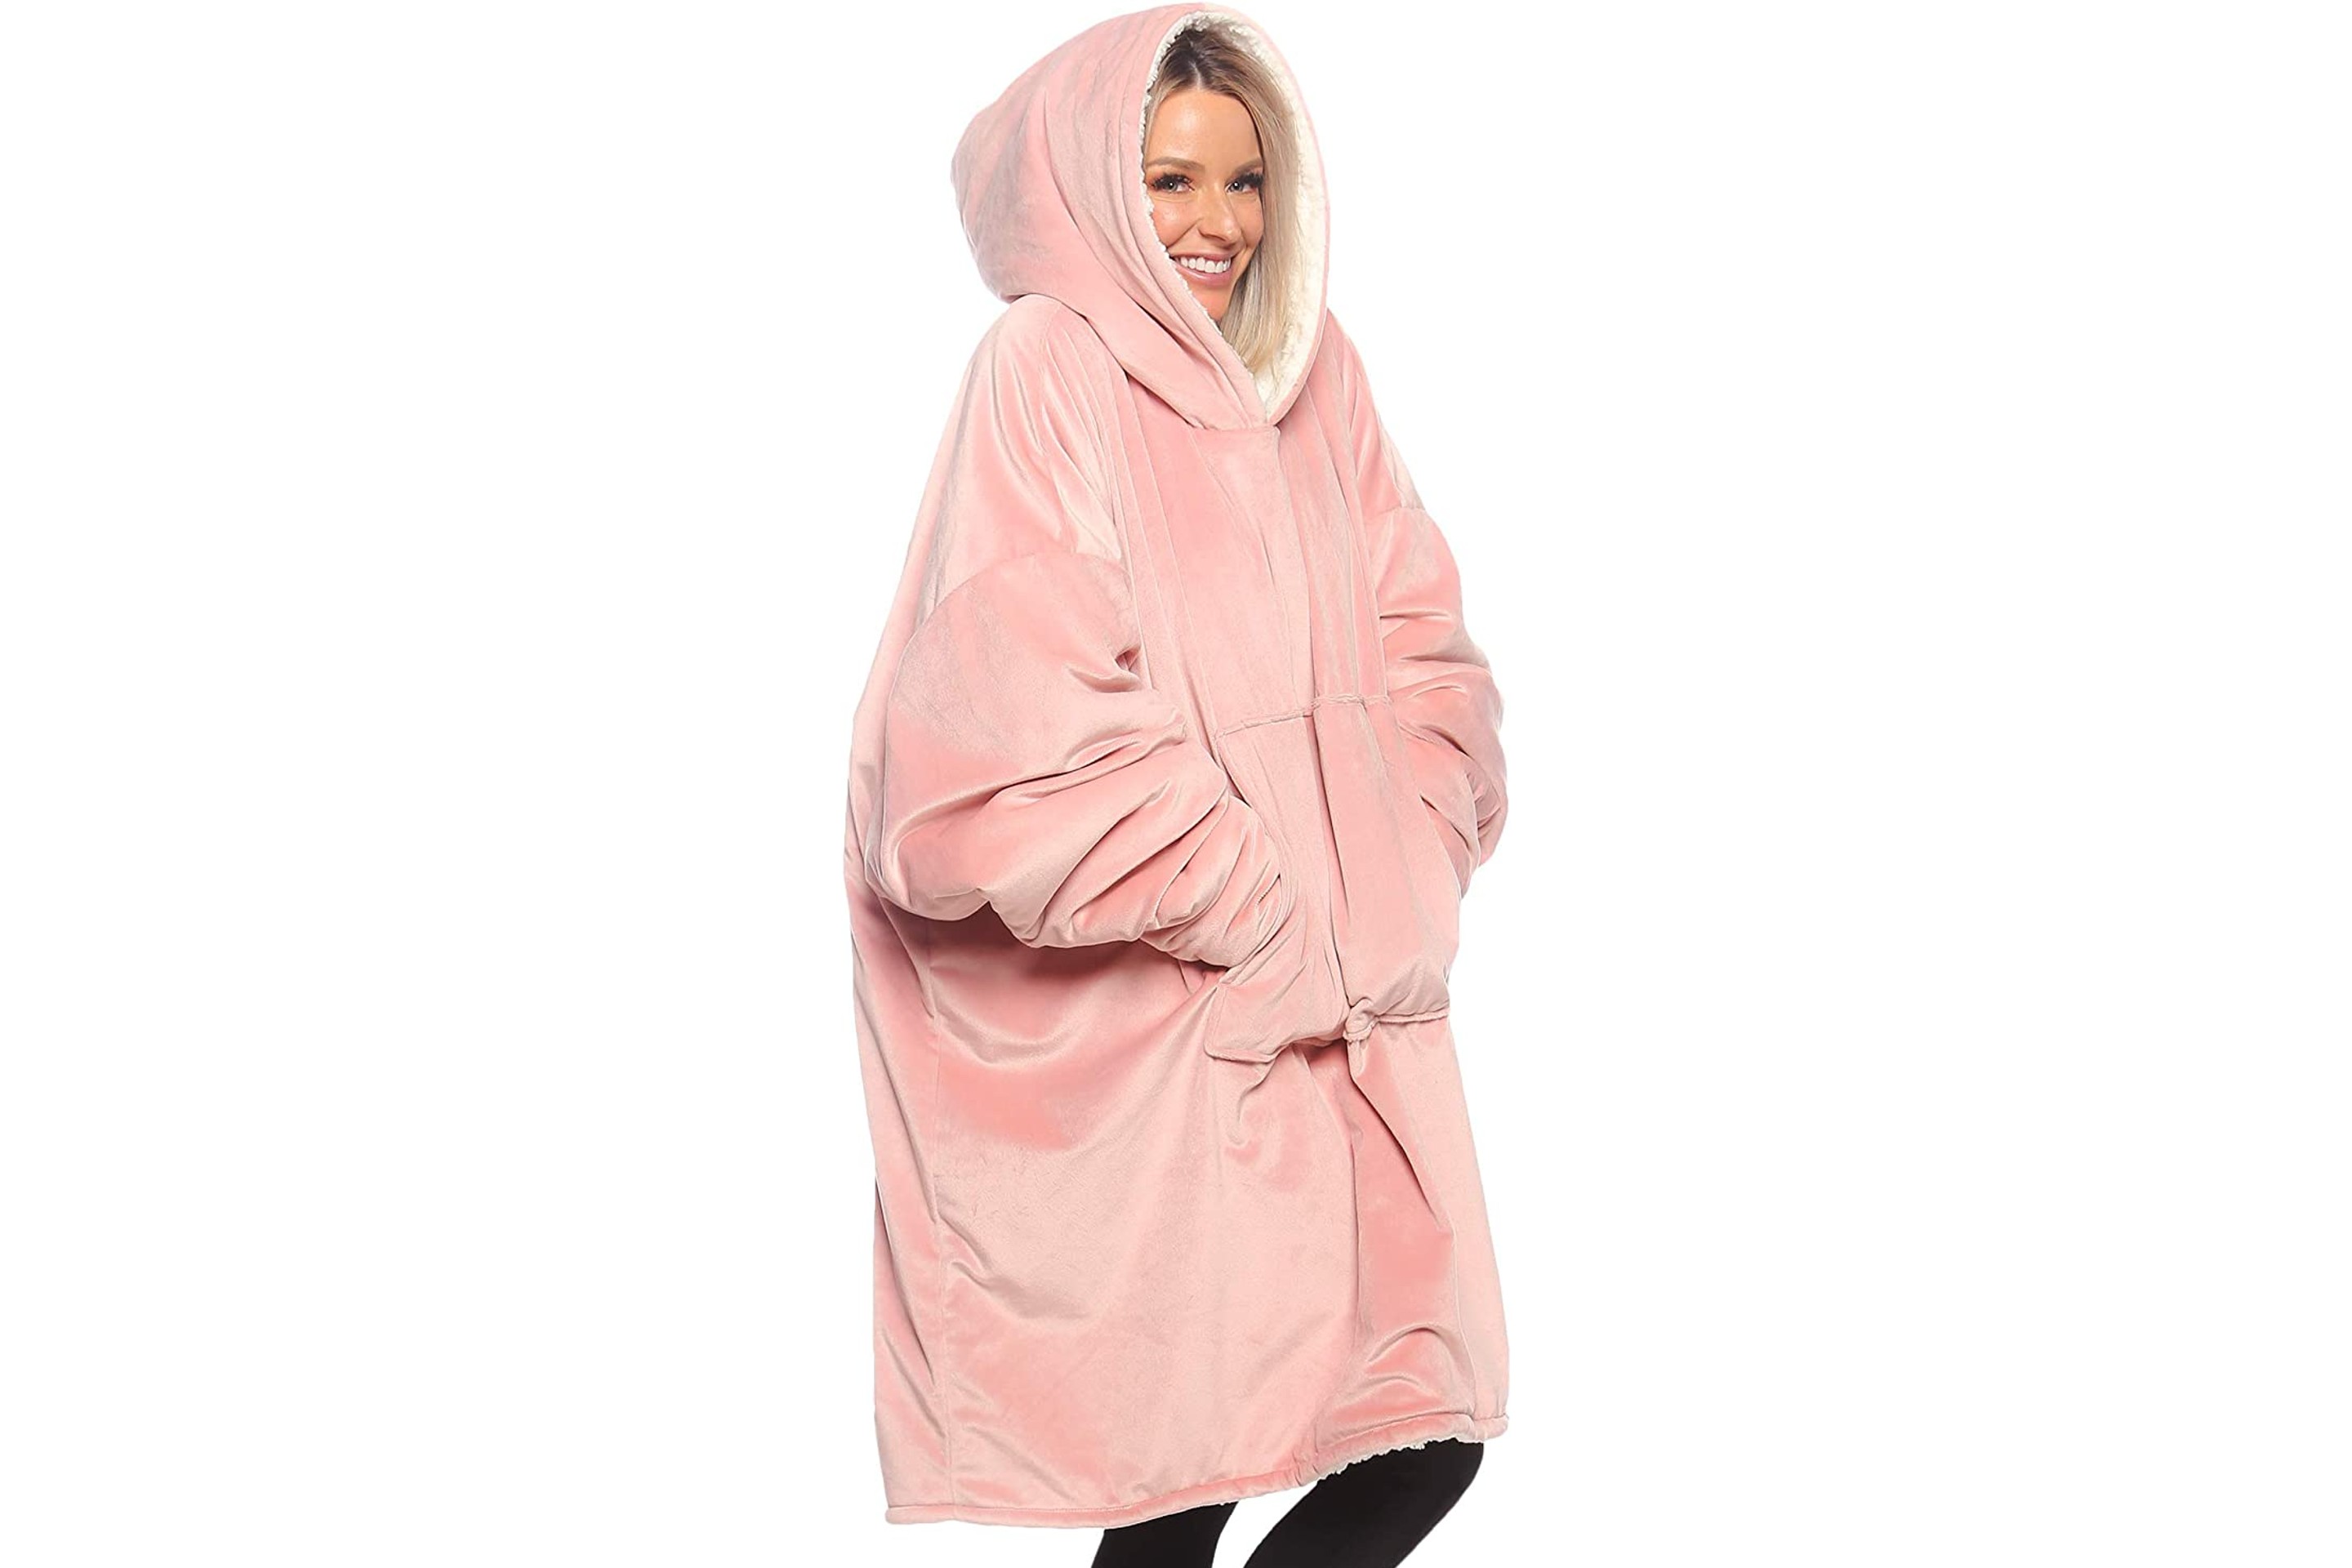 The Comfy Oversized Wearable Blanket